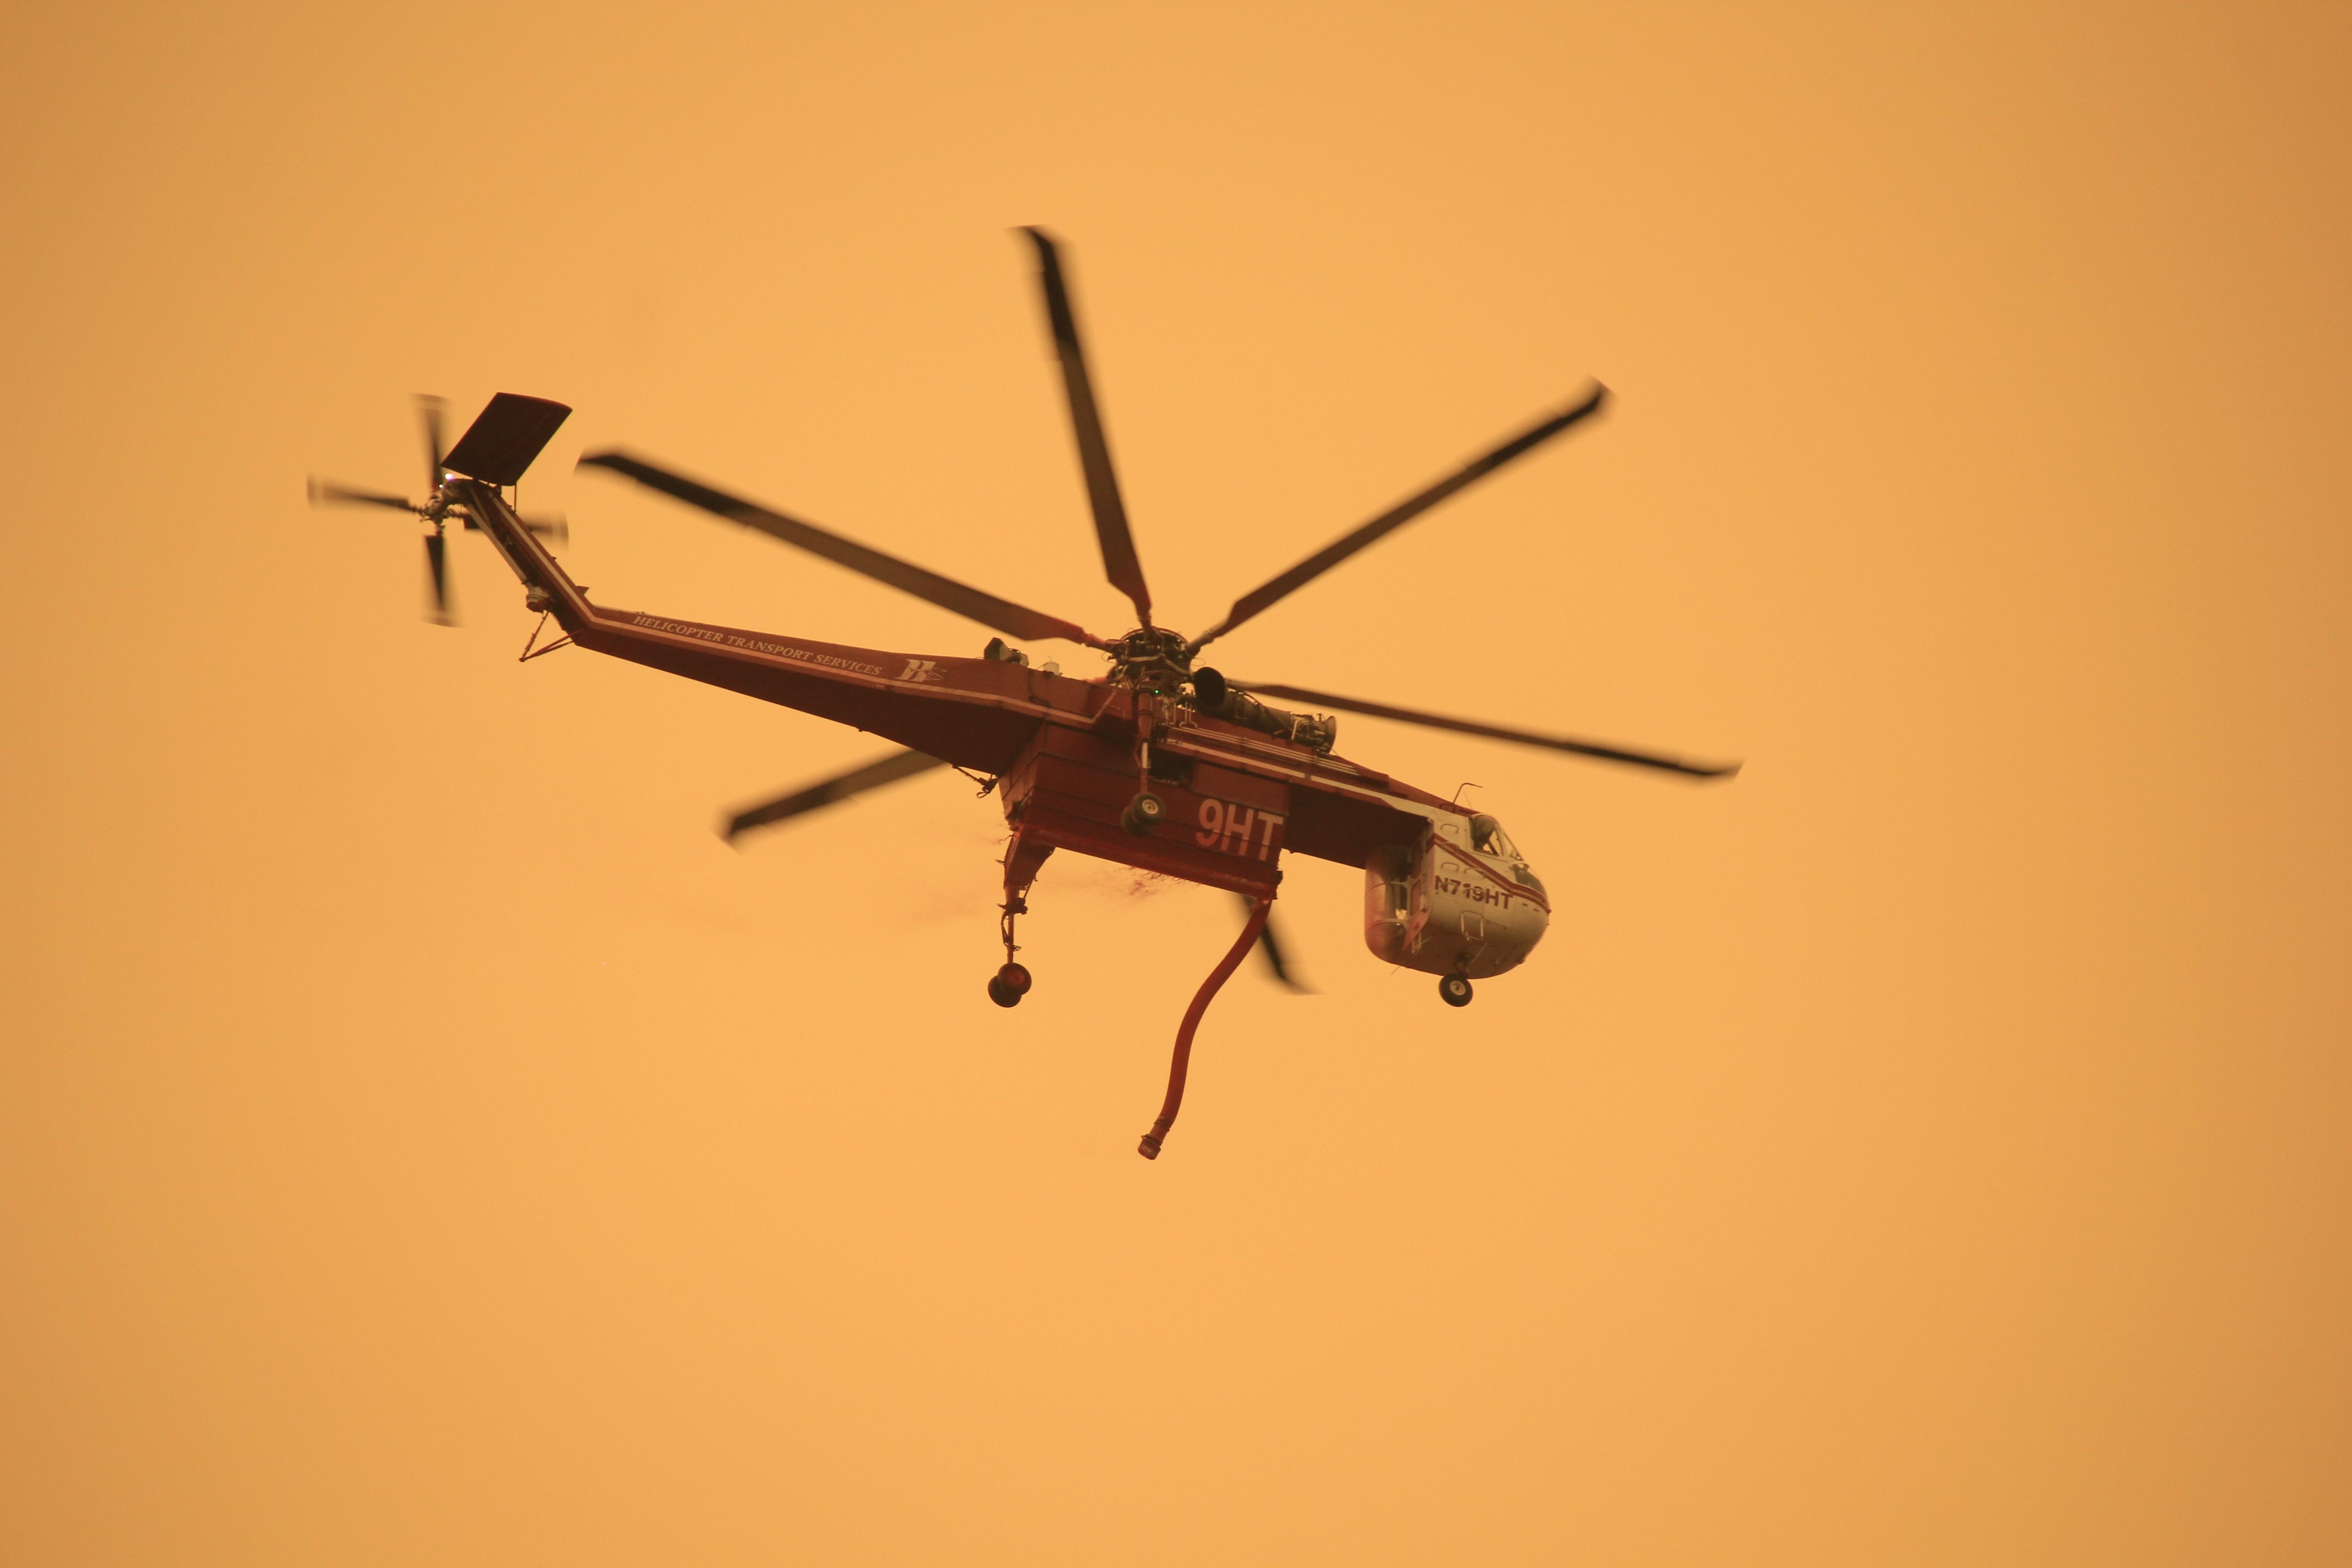 A helicopter with a hose flies in orange skies